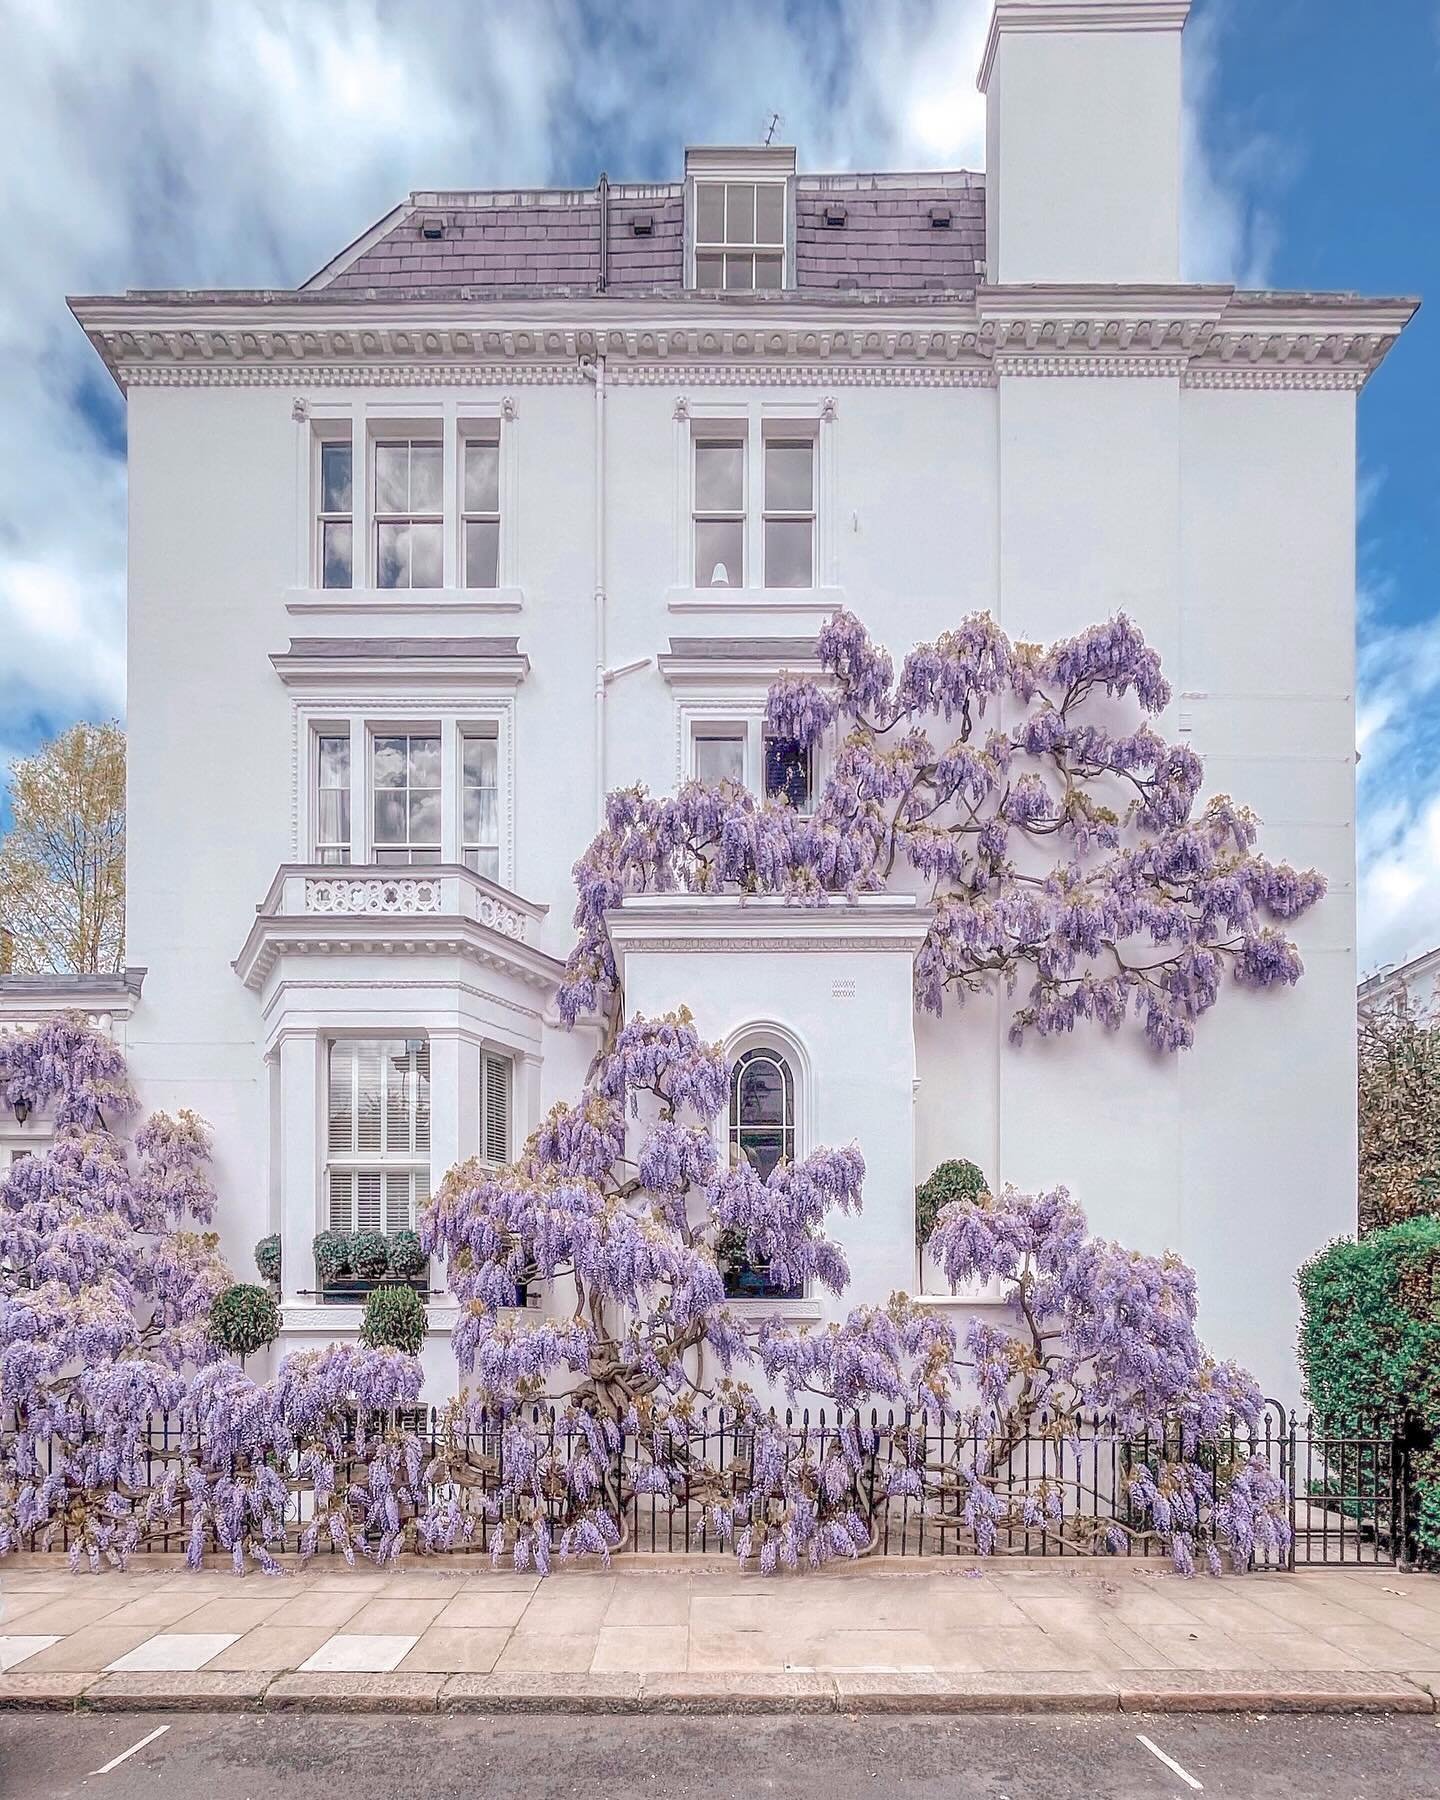 Spring is full of promise and hope. 

Wish you were here,
Xoxo

#springinlondon #londonlife #itssolondon #thisislondon #wisteria #wisteriahysteria